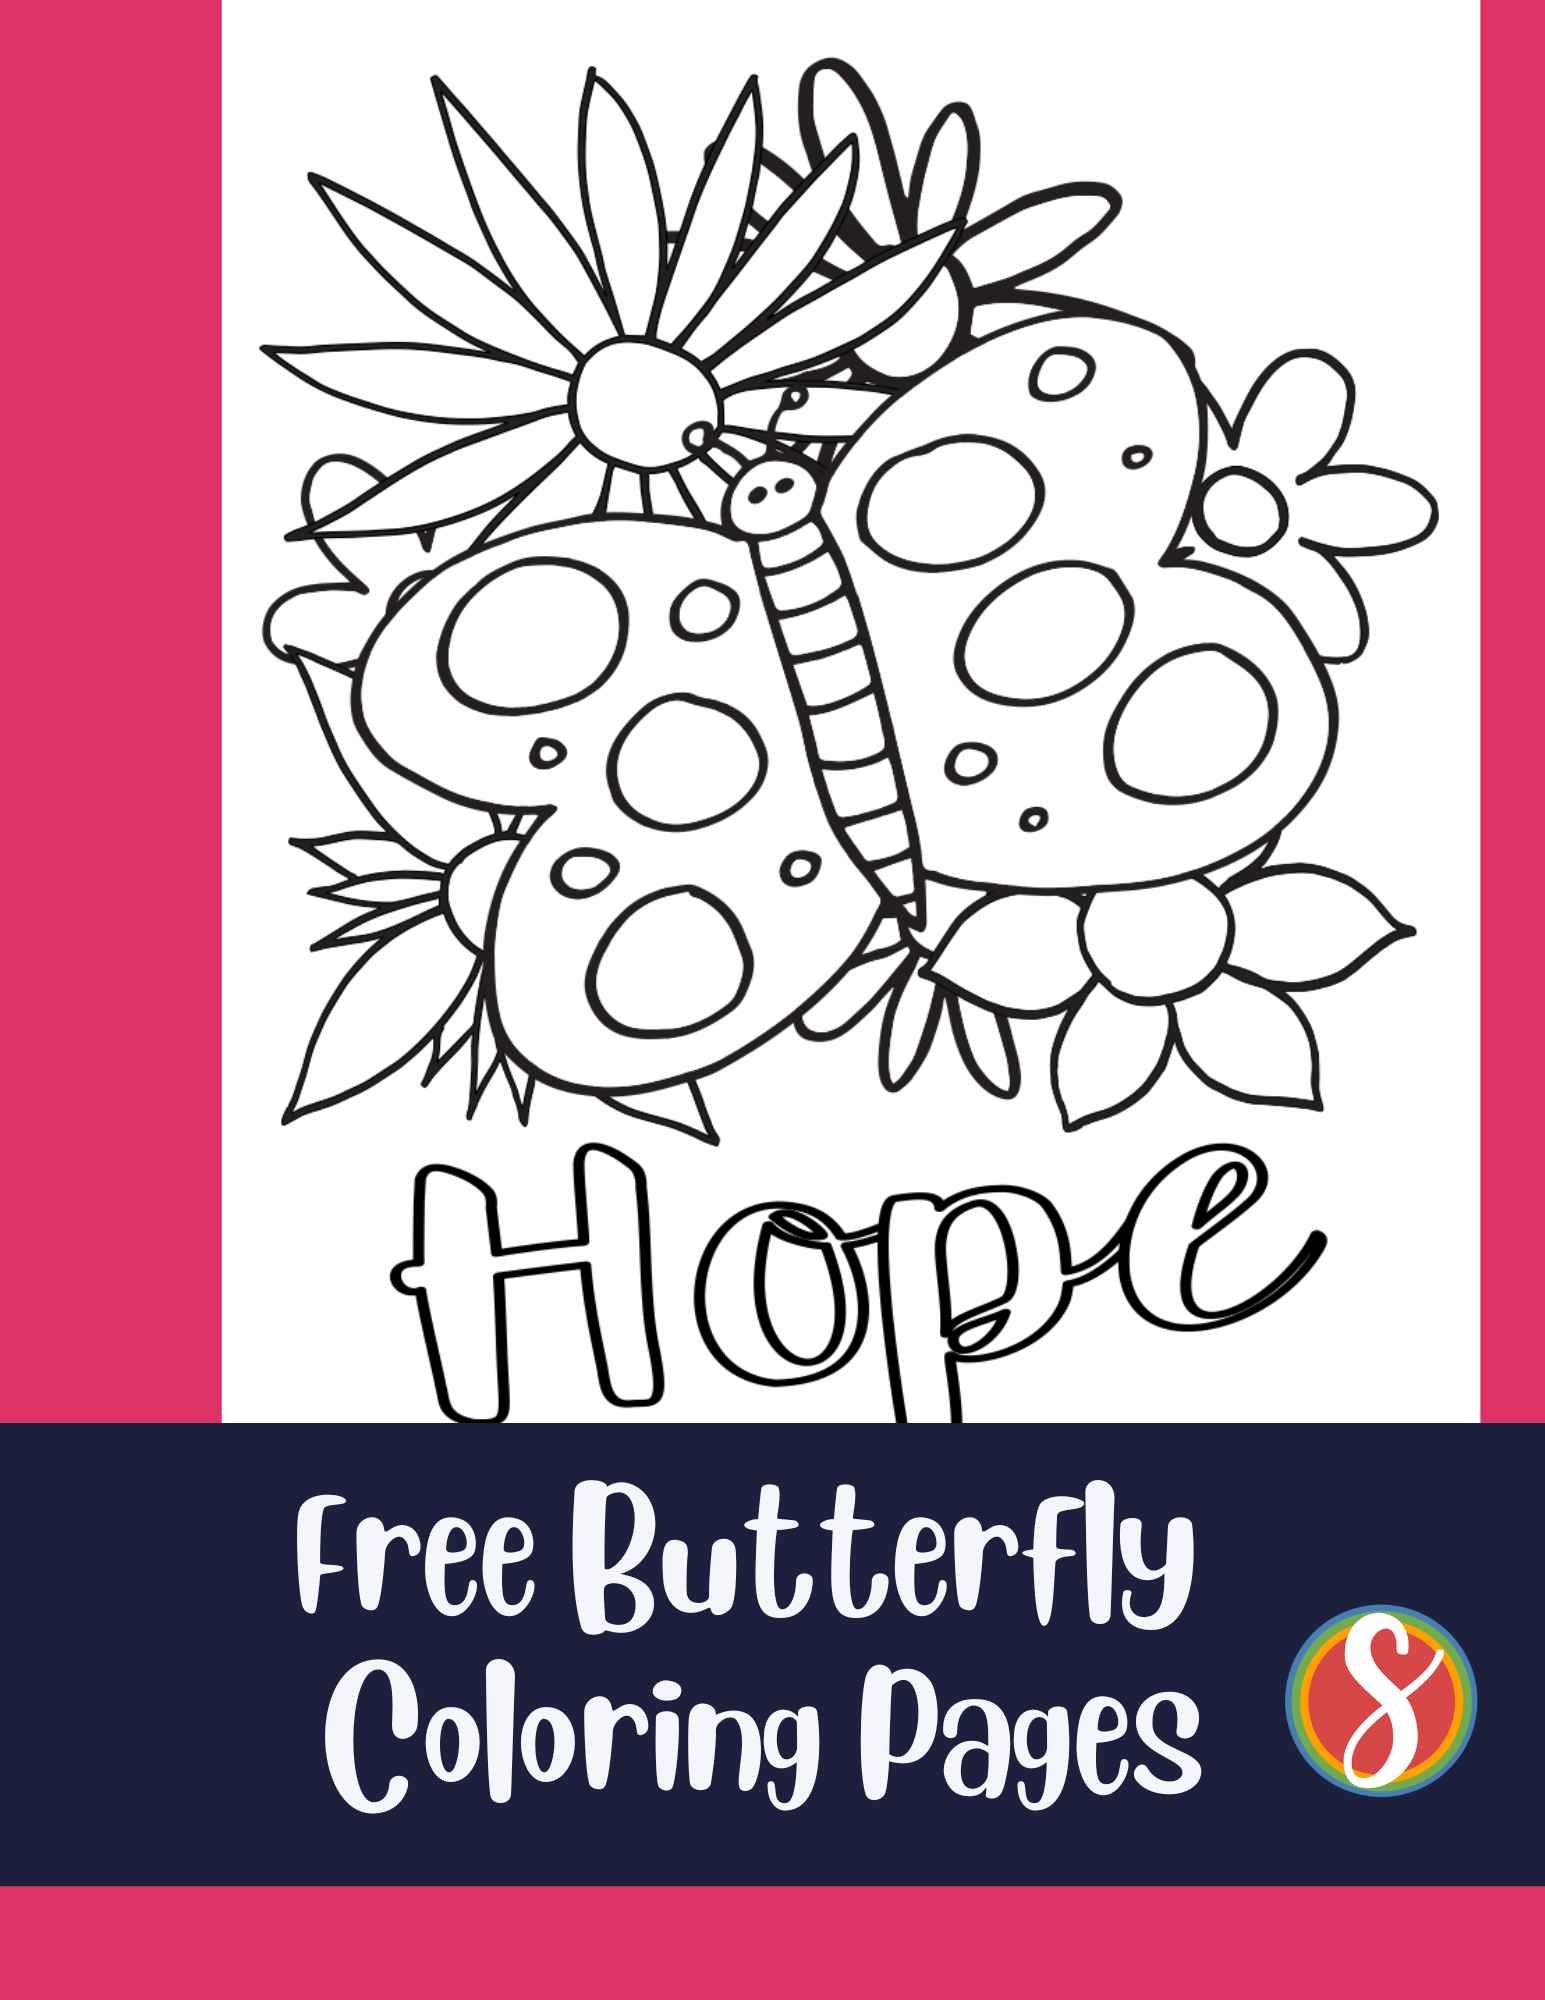 a butterfly with dots, background of flowers, colorable word "hope" coloring page